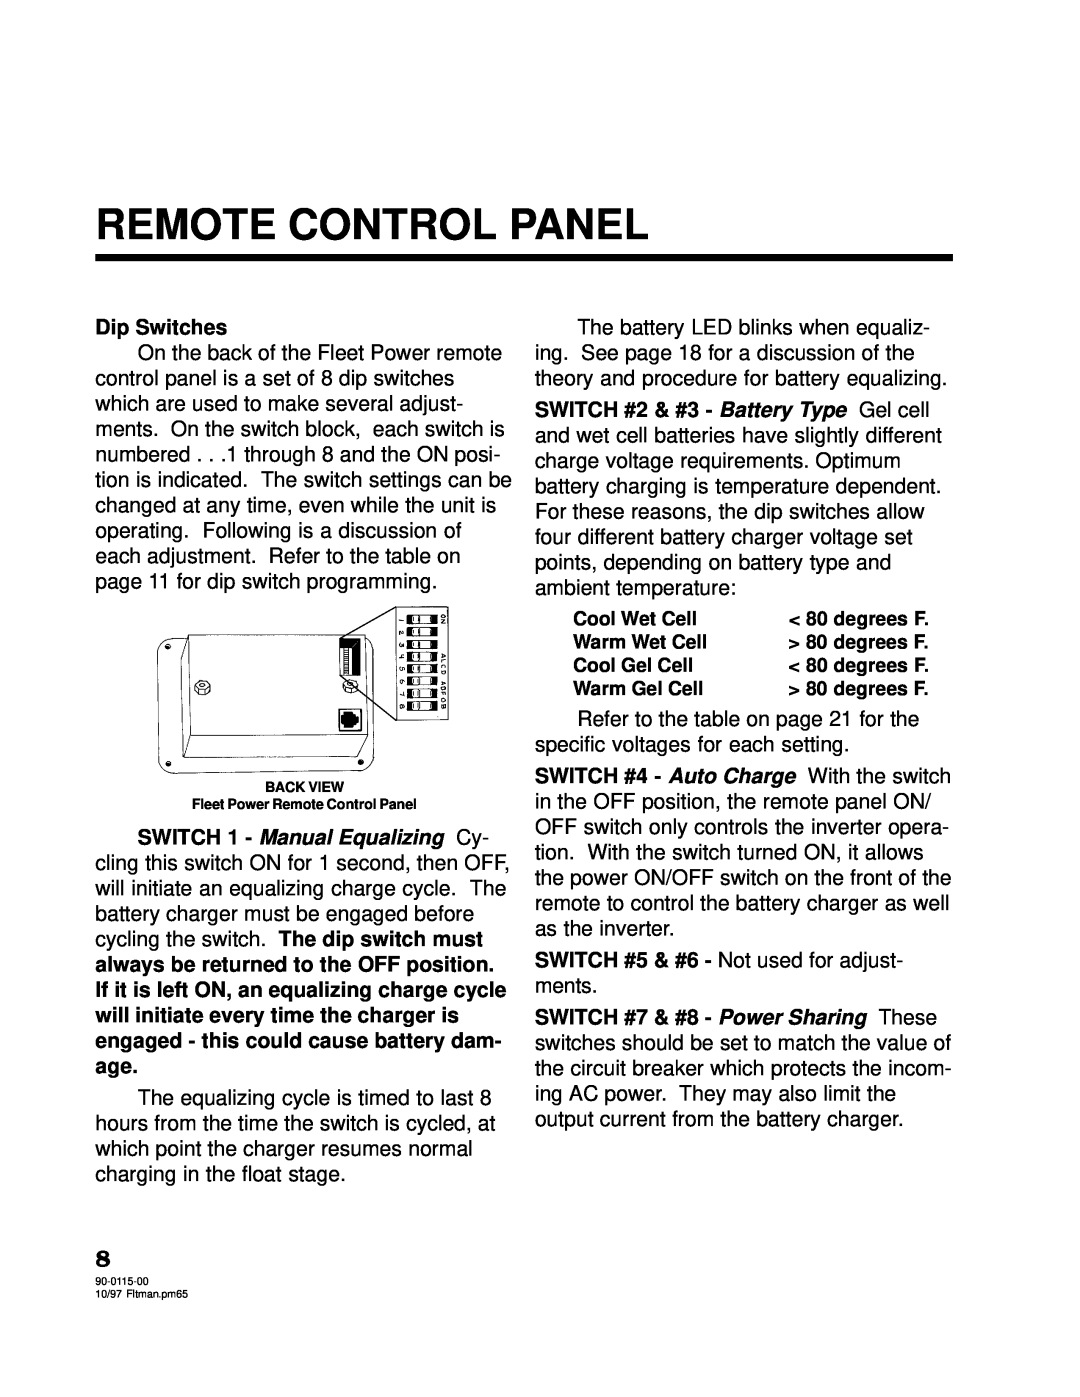 Xantrex Technology 2500, 2000 owner manual Remote Control Panel, Dip Switches 